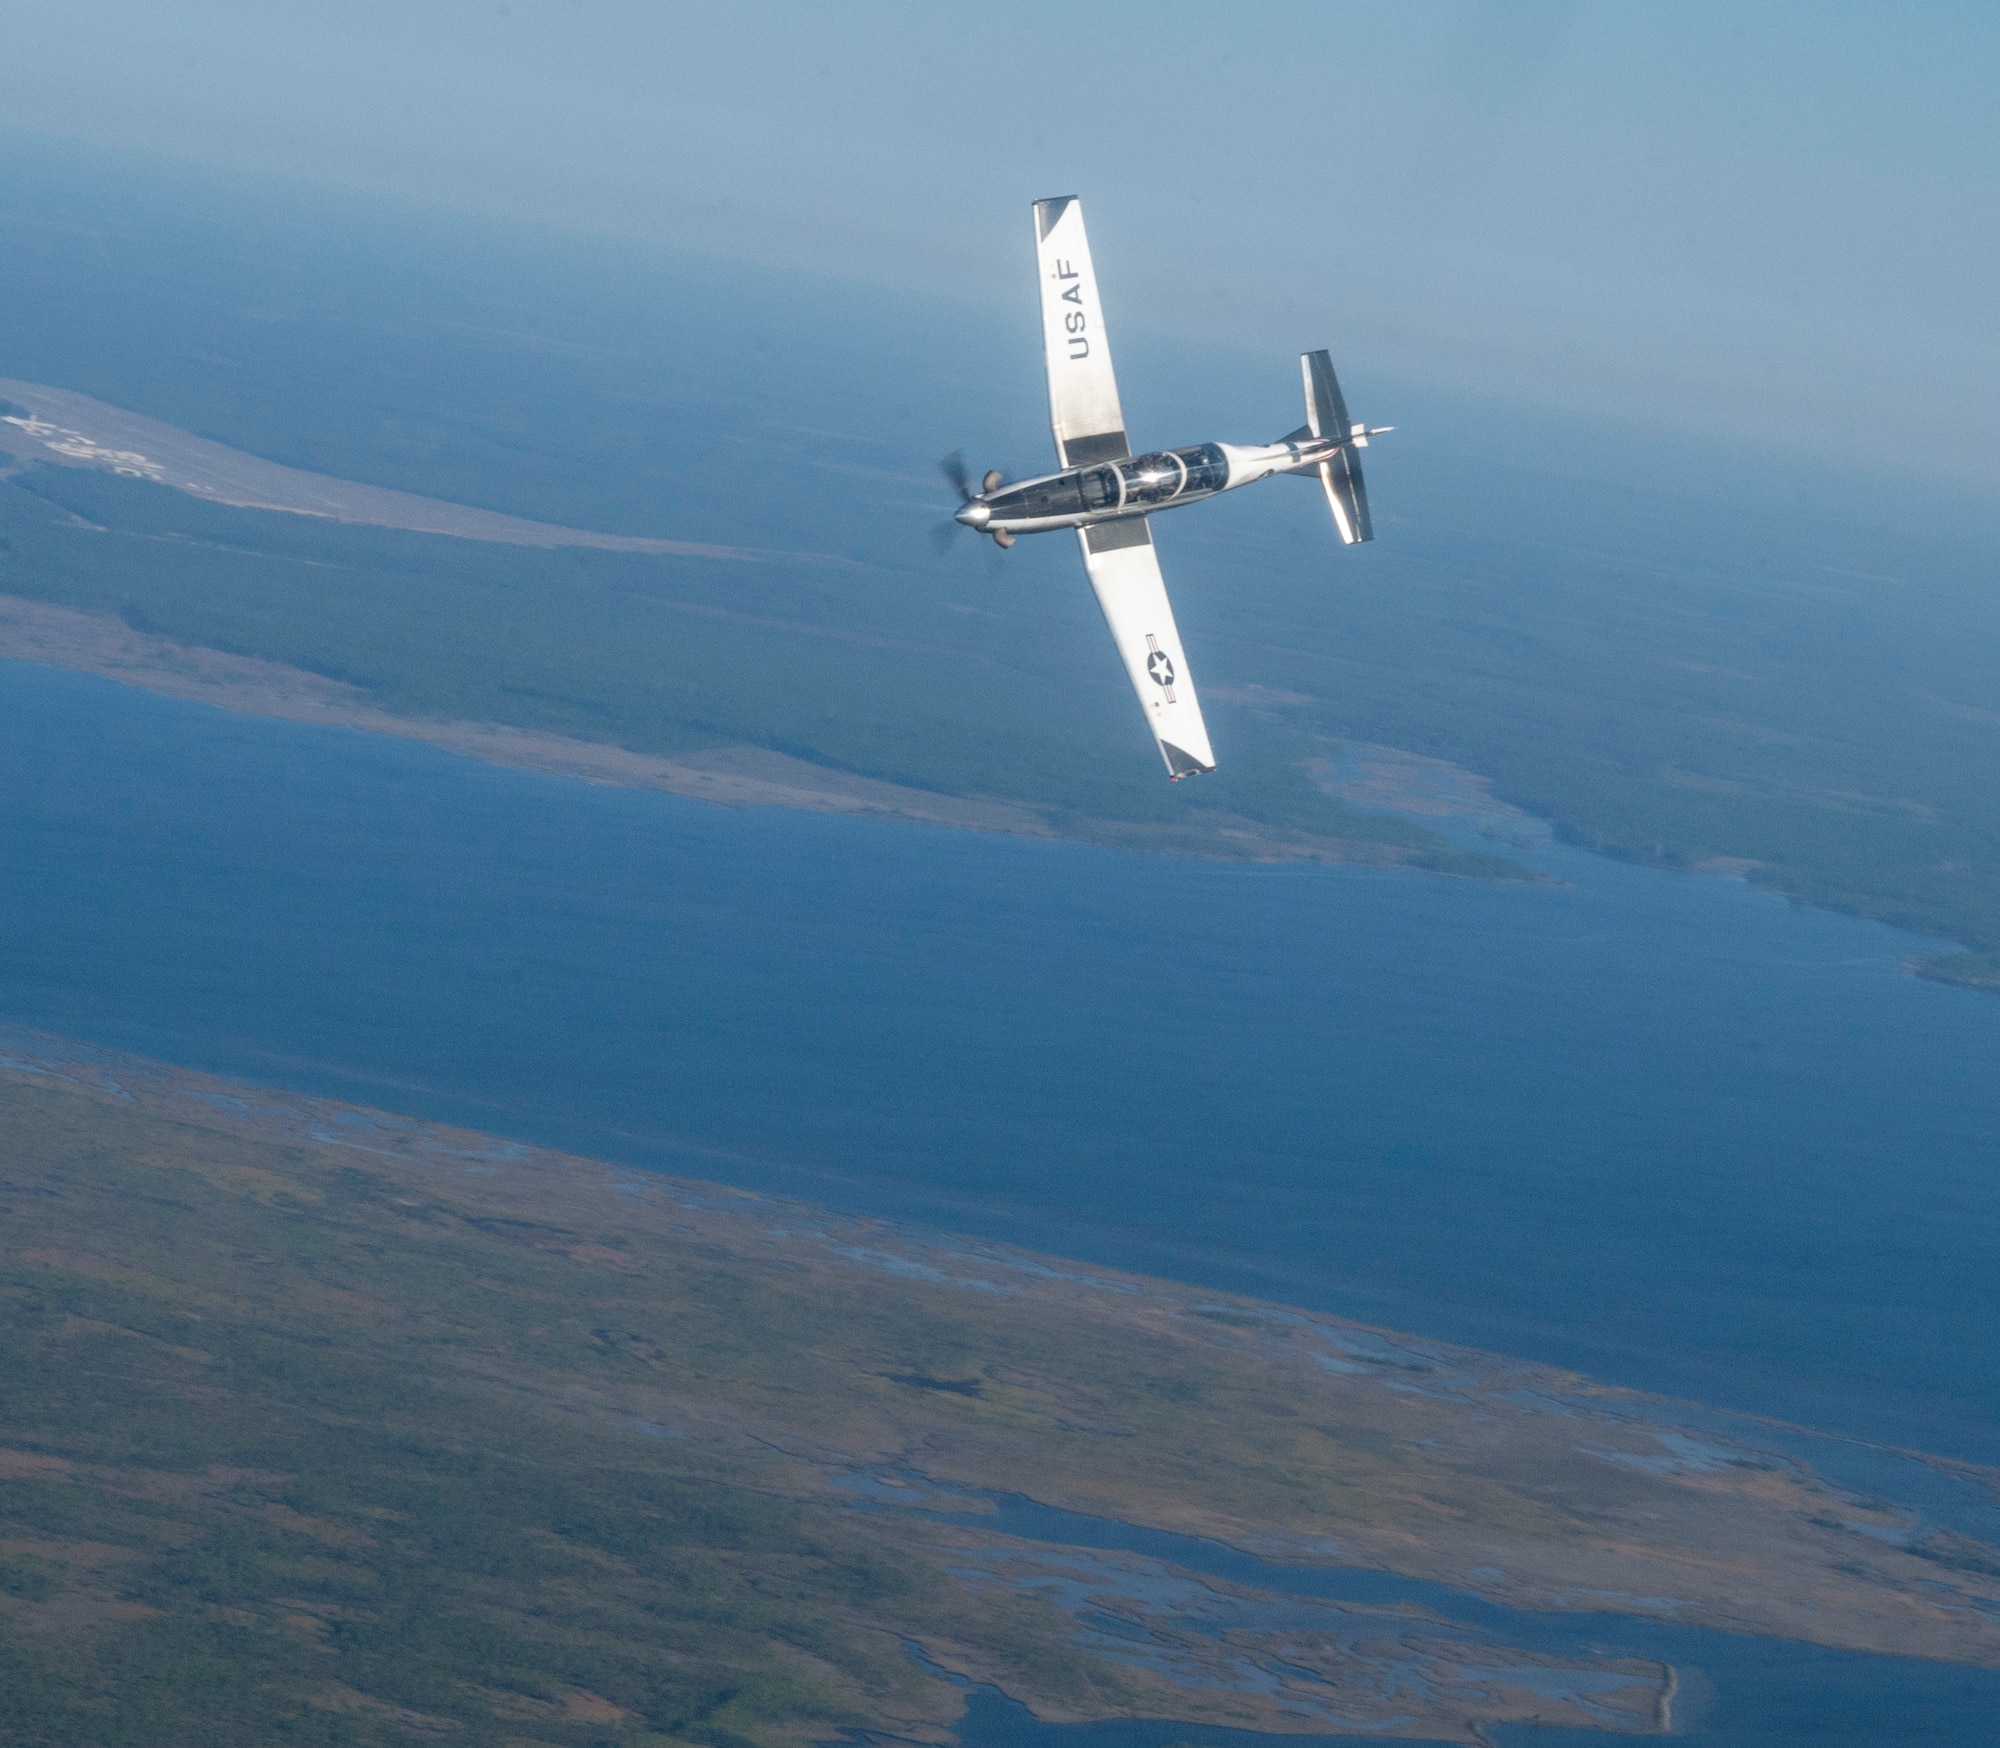 A T-6 Texan II turns in the skies of Florida as part of Ambush Florida on Oct. 14, 2022. Ambush Florida is a mission where pilots from the 85th Flying Training Squadron fly to a different region of the U.S. and "ambush" other bases, helping pilots gain experience in long distance flights. (U.S. Air Force photo by Senior Airman Nicholas Larsen.)